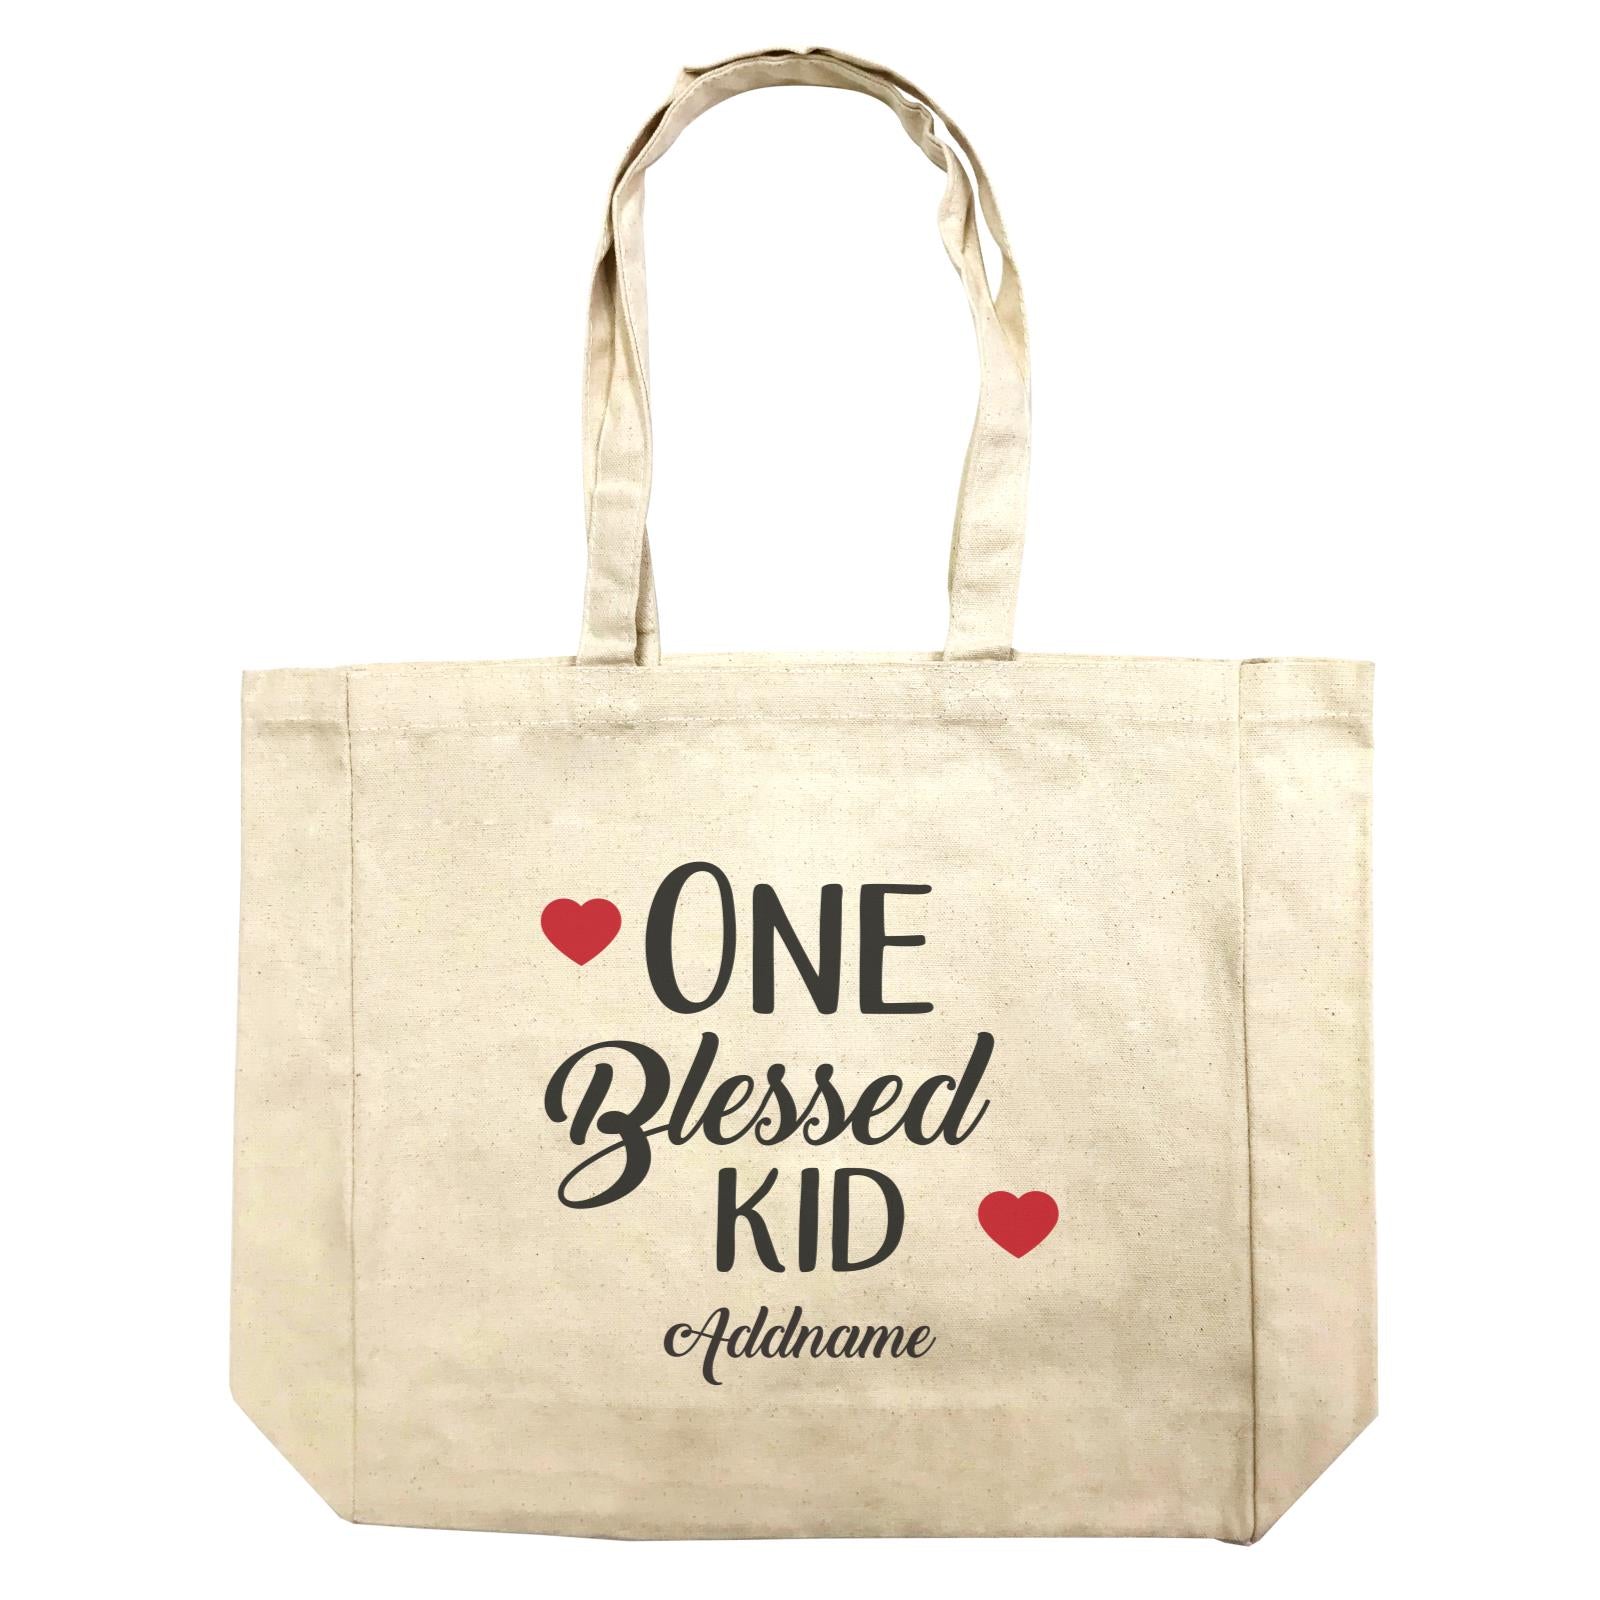 Christian Series One Blessed Kid Addname Shopping Bag